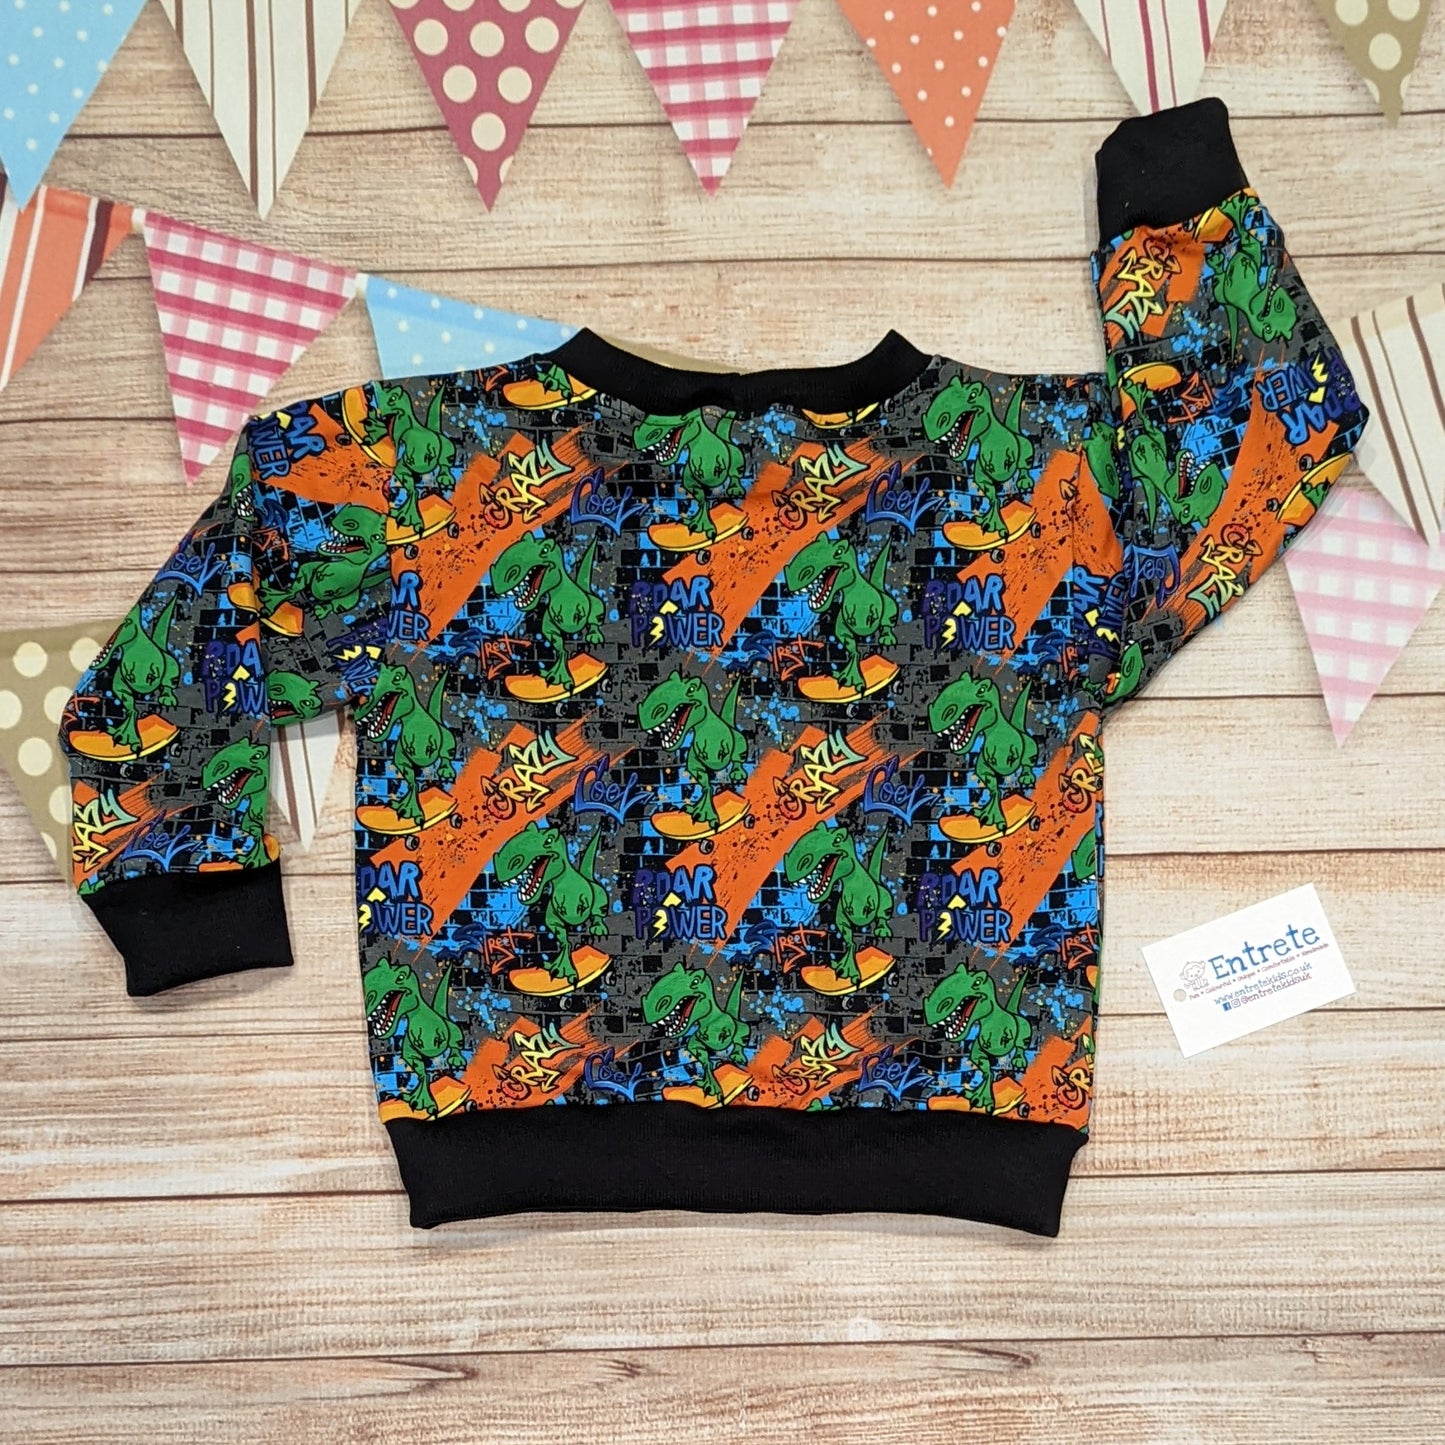 The insanely fun skateboarding dinosaurs sweatshirt. Handmade using street dino cotton French terry and black cotton ribbing. Shown from the rear.